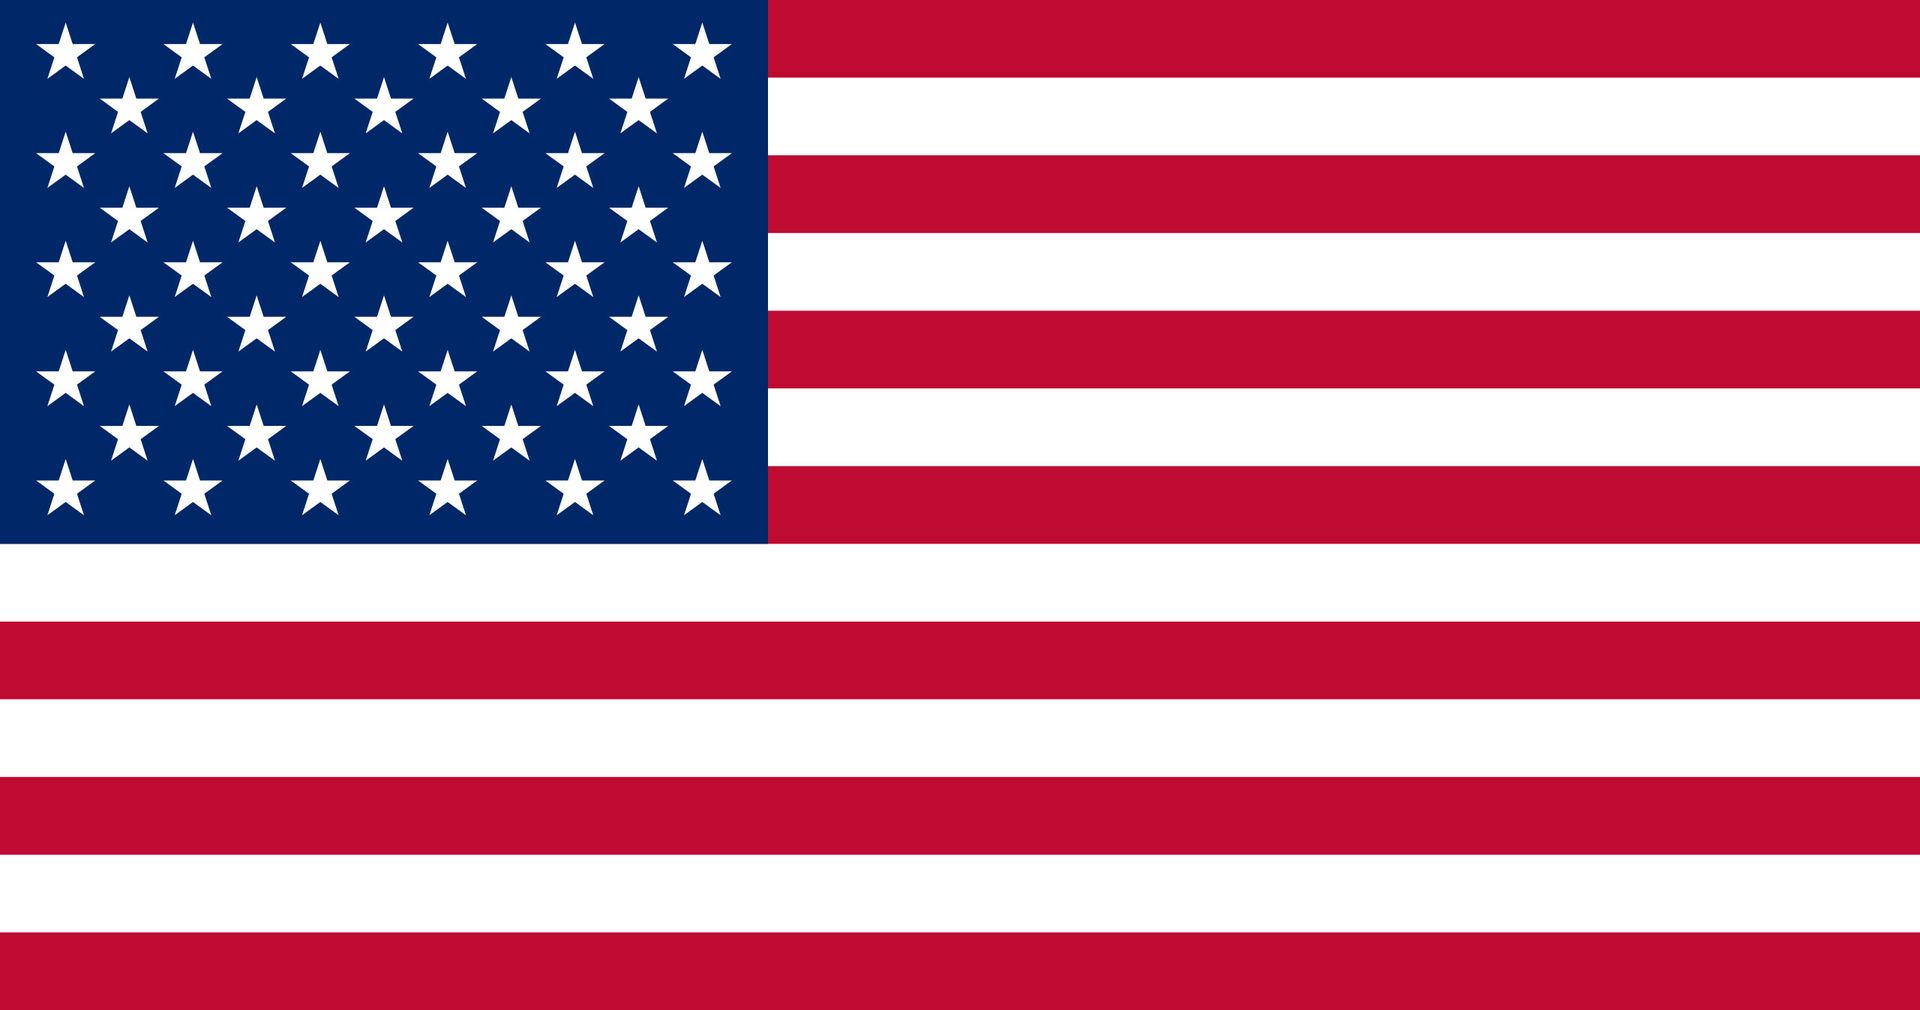 The American flag is red, white, and blue with stars on it